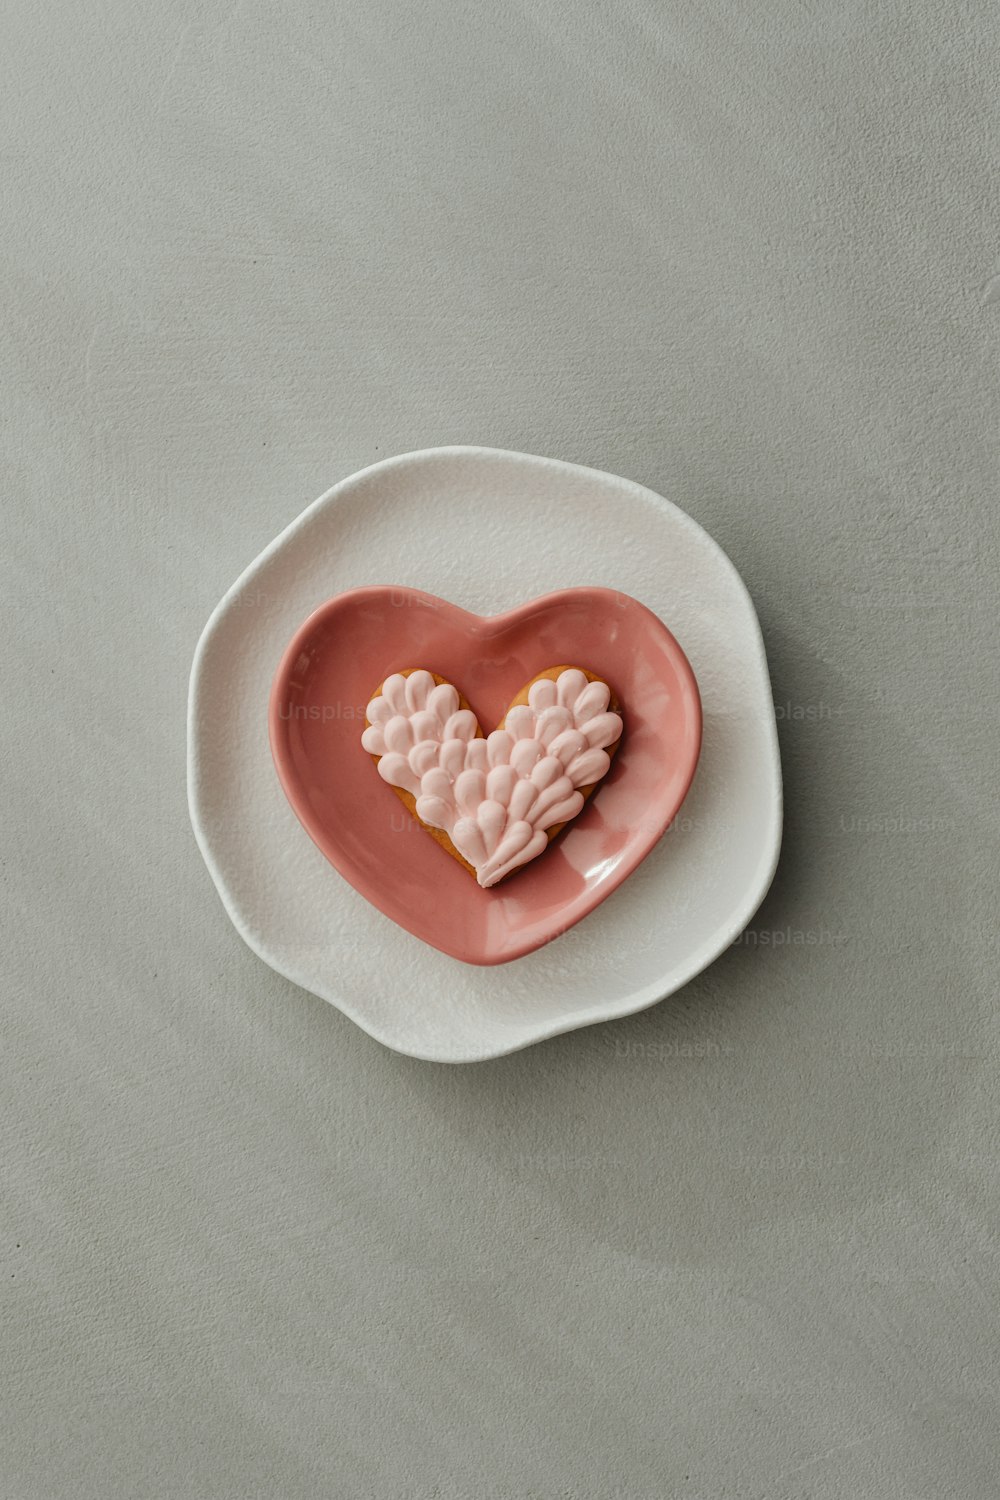 a heart shaped cookie sitting on top of a white plate